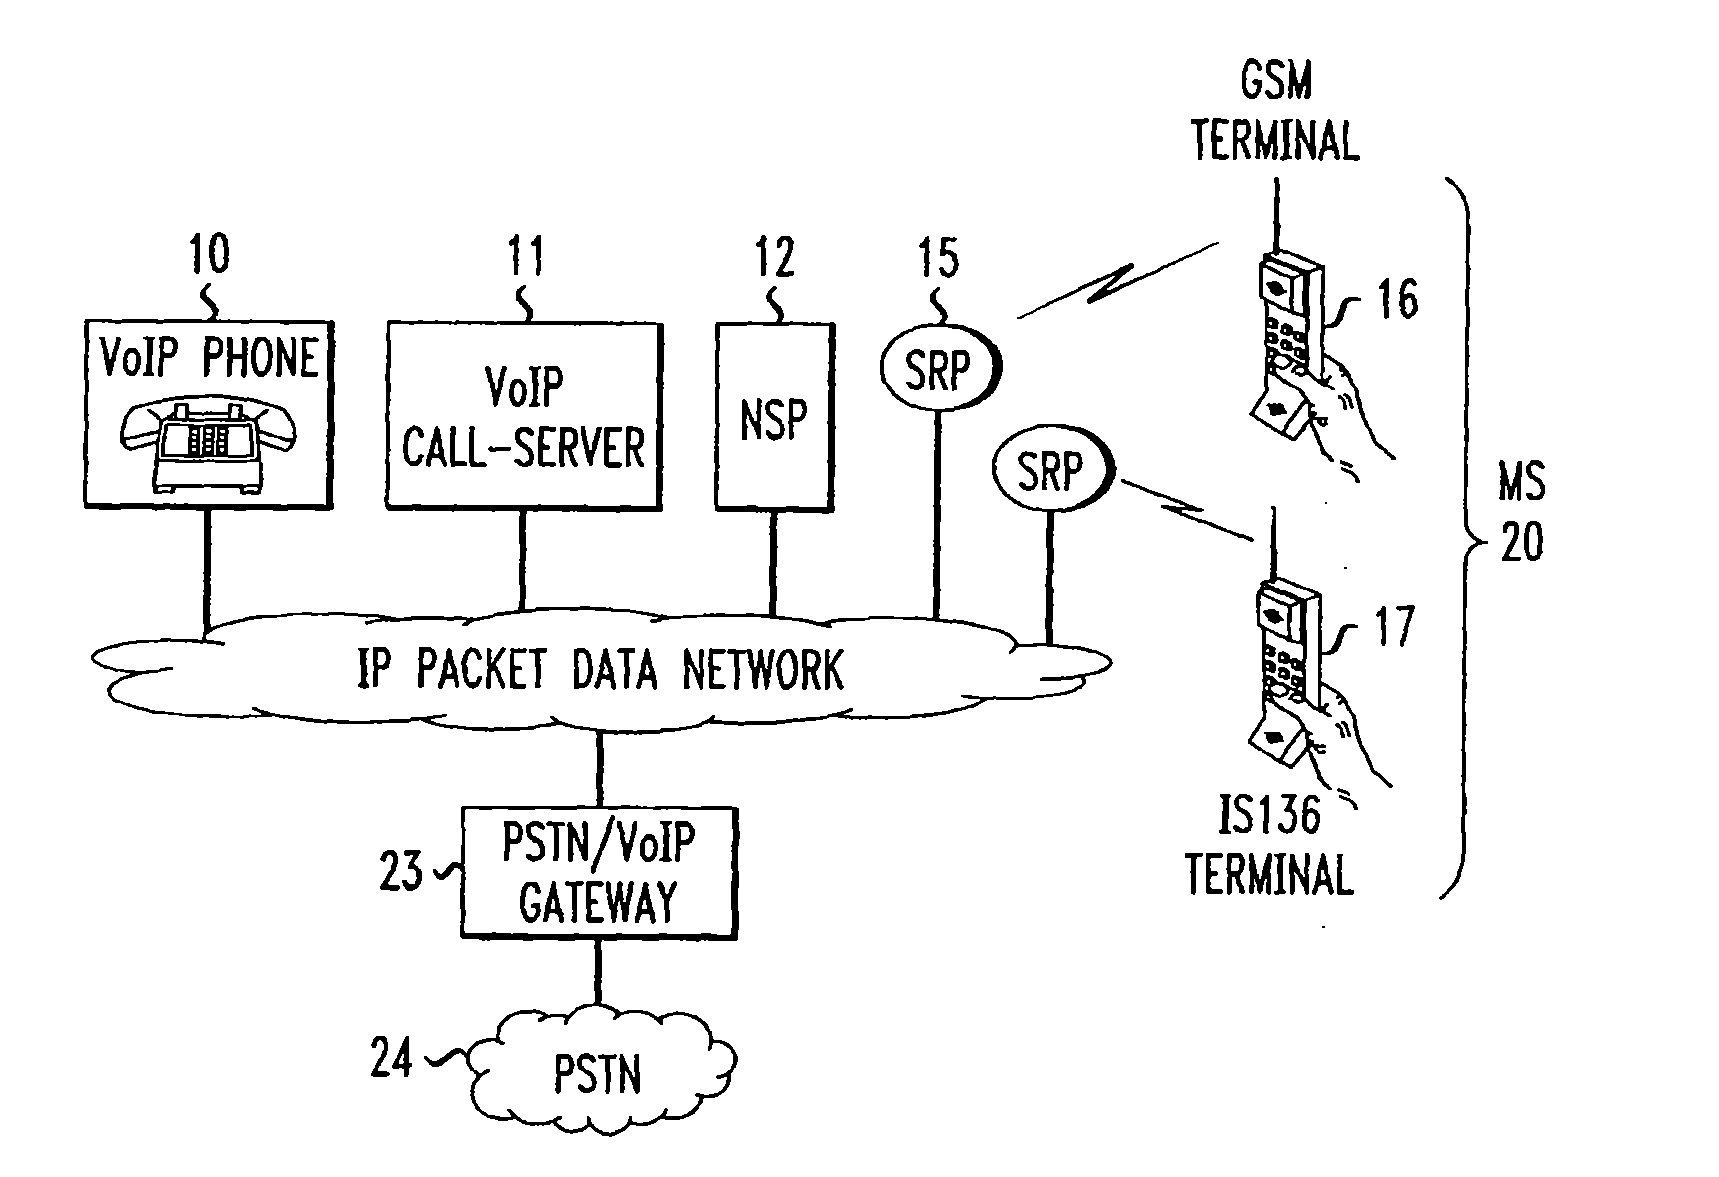 METHOD FOR PROVIDING VoIP SERVICES FOR WIRELESS TERMINALS